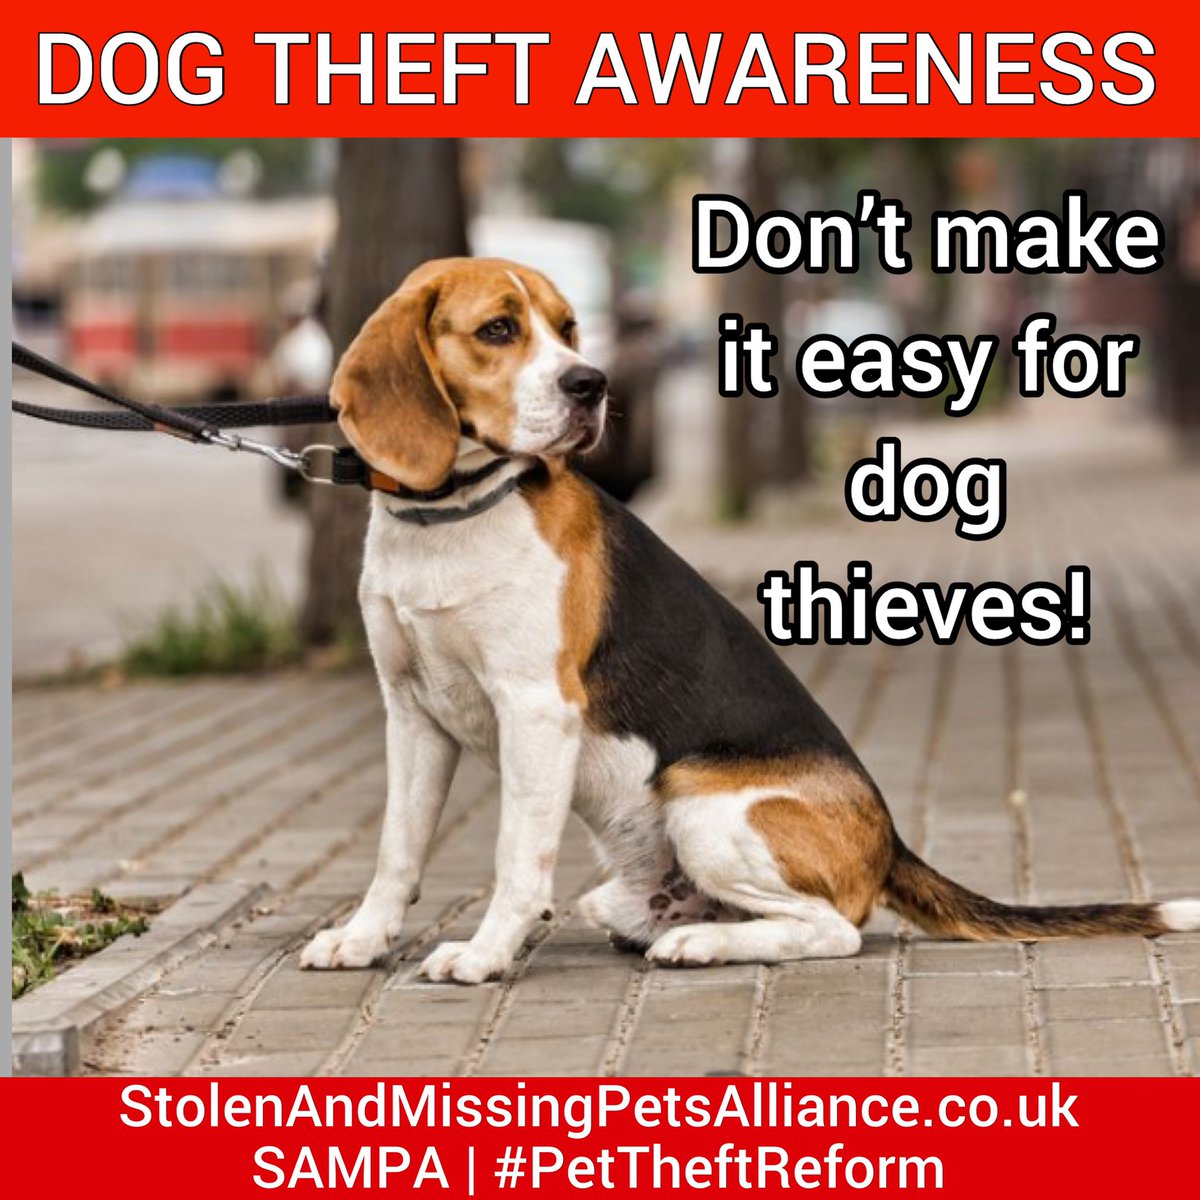 Today is #DogTheftAwarenessDay. Keep safe and be aware. Don’t make it easy for dog thieves #PetAbduction is up by 6% on last year according to new Police figures 💔 #PetTheftReform stolenandmissingpetsalliance.co.uk/dog-theft-awar…